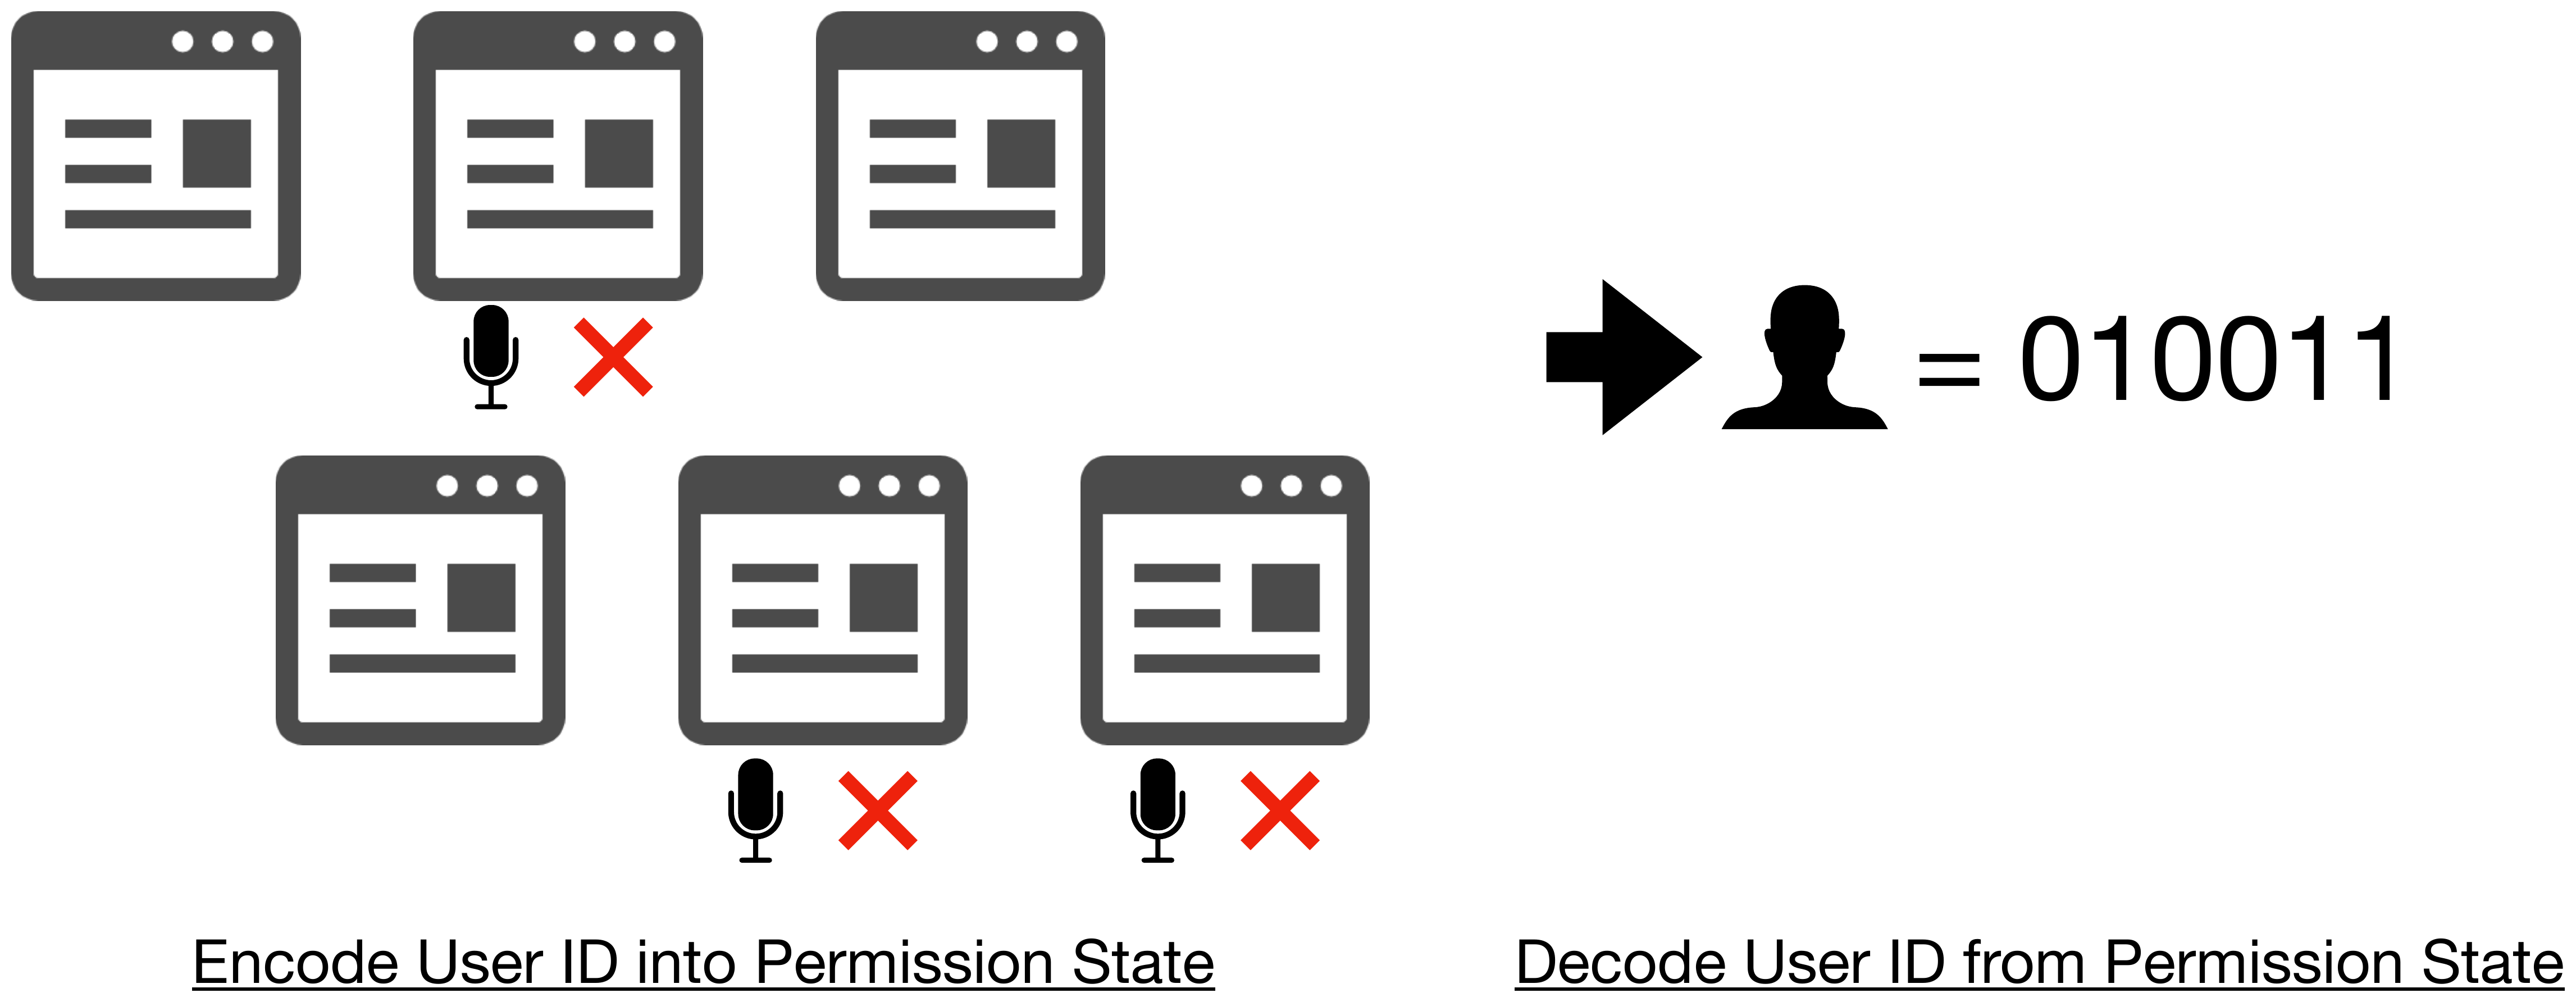 Tracking by exploiting permission settings